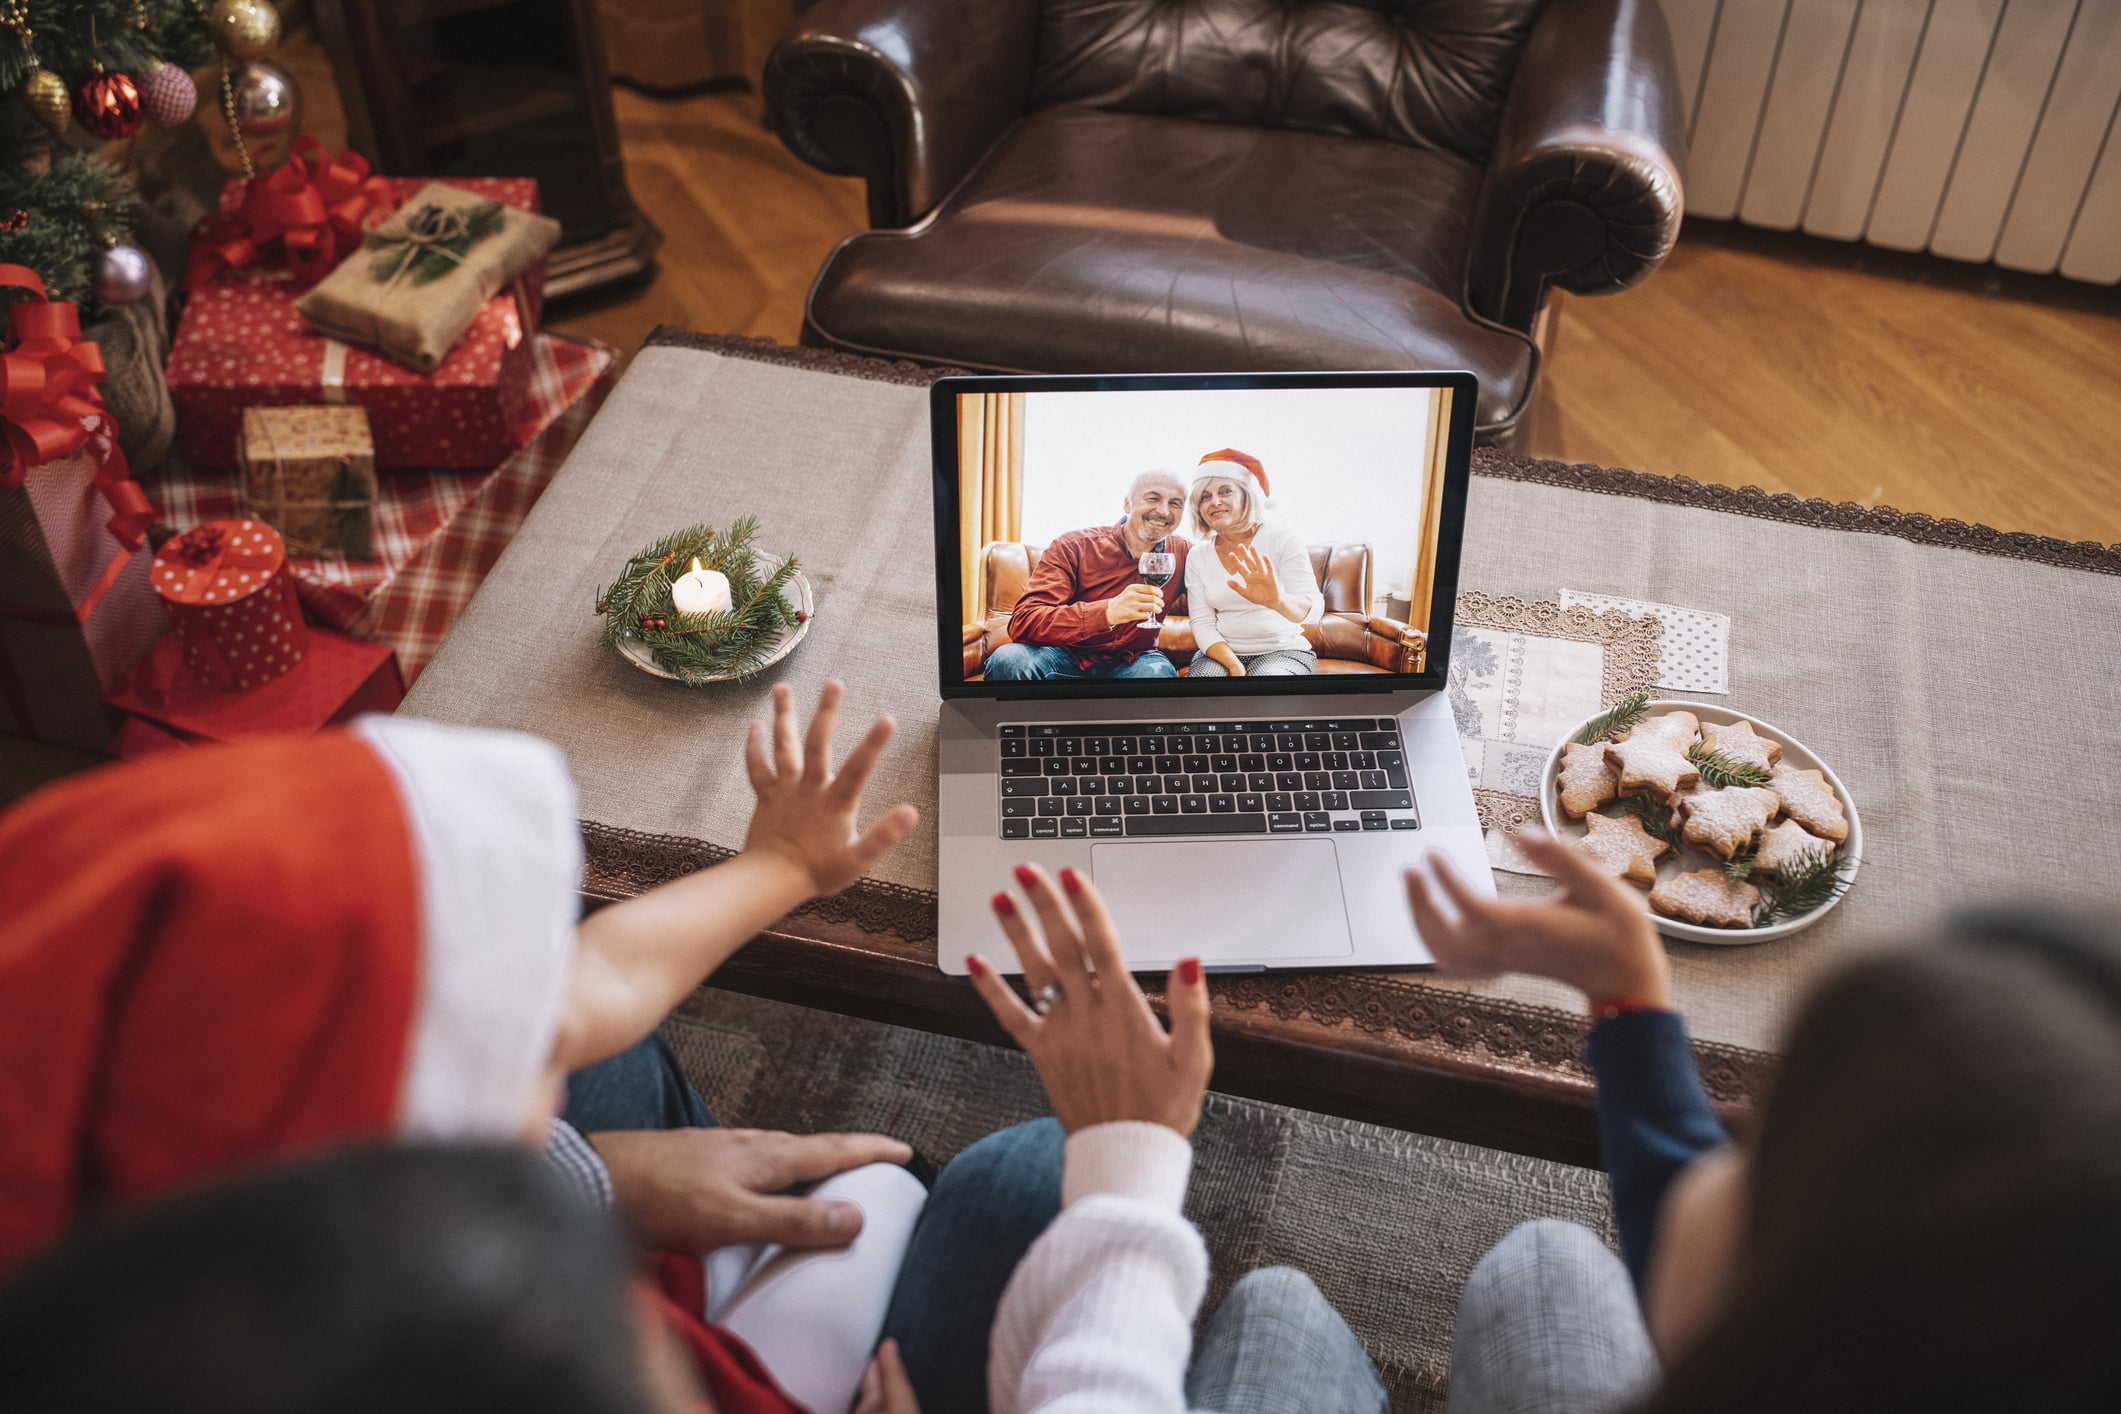 Two adults and a toddler sitting with their backs to the camera in a living room decorated for Christmas. They’re looking at an open laptop on the coffee table in front of them. Displayed on the screen are a man and a woman in their late 50s, sitting close together on a love seat. The man is smiling and holding a glass of red wine while the woman, wearing a Santa hat, waves.